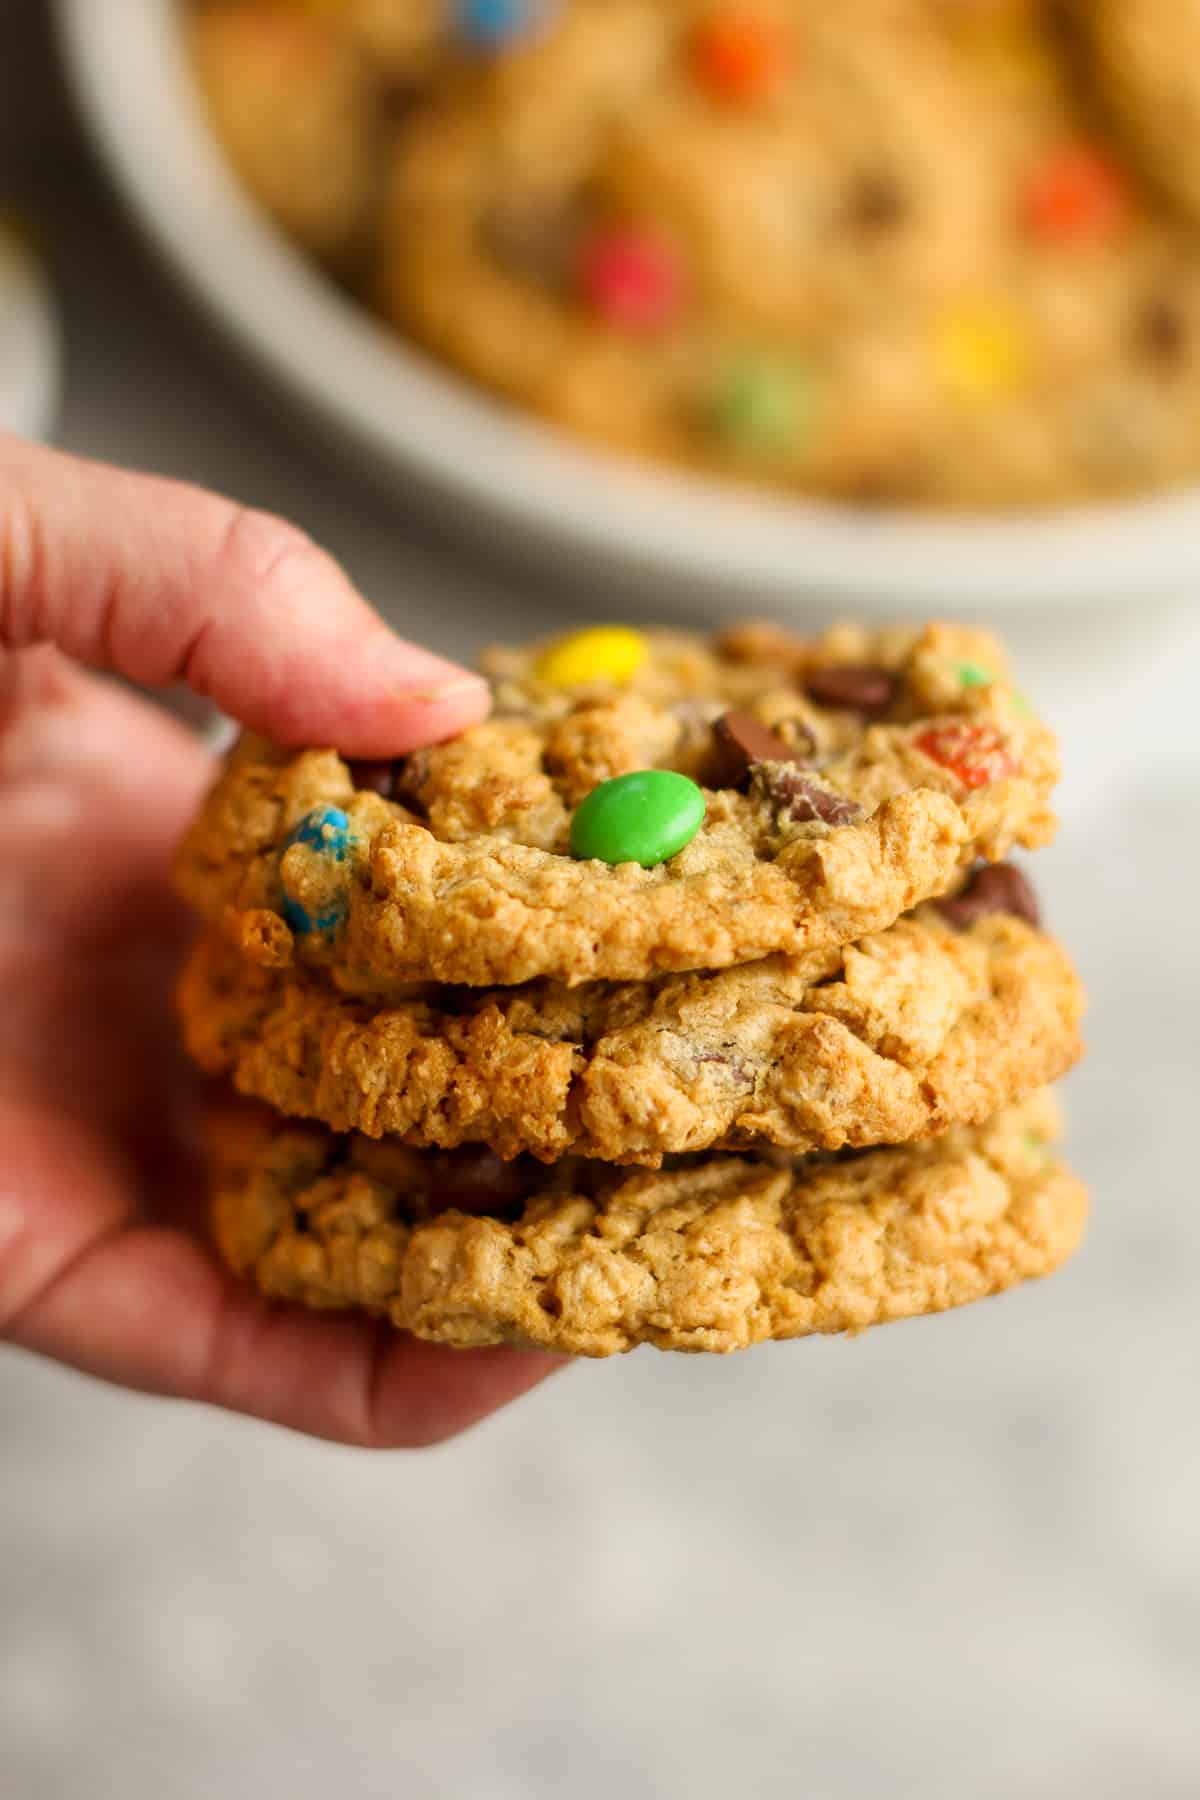 My hand holding three flourless monster cookies with m&ms.